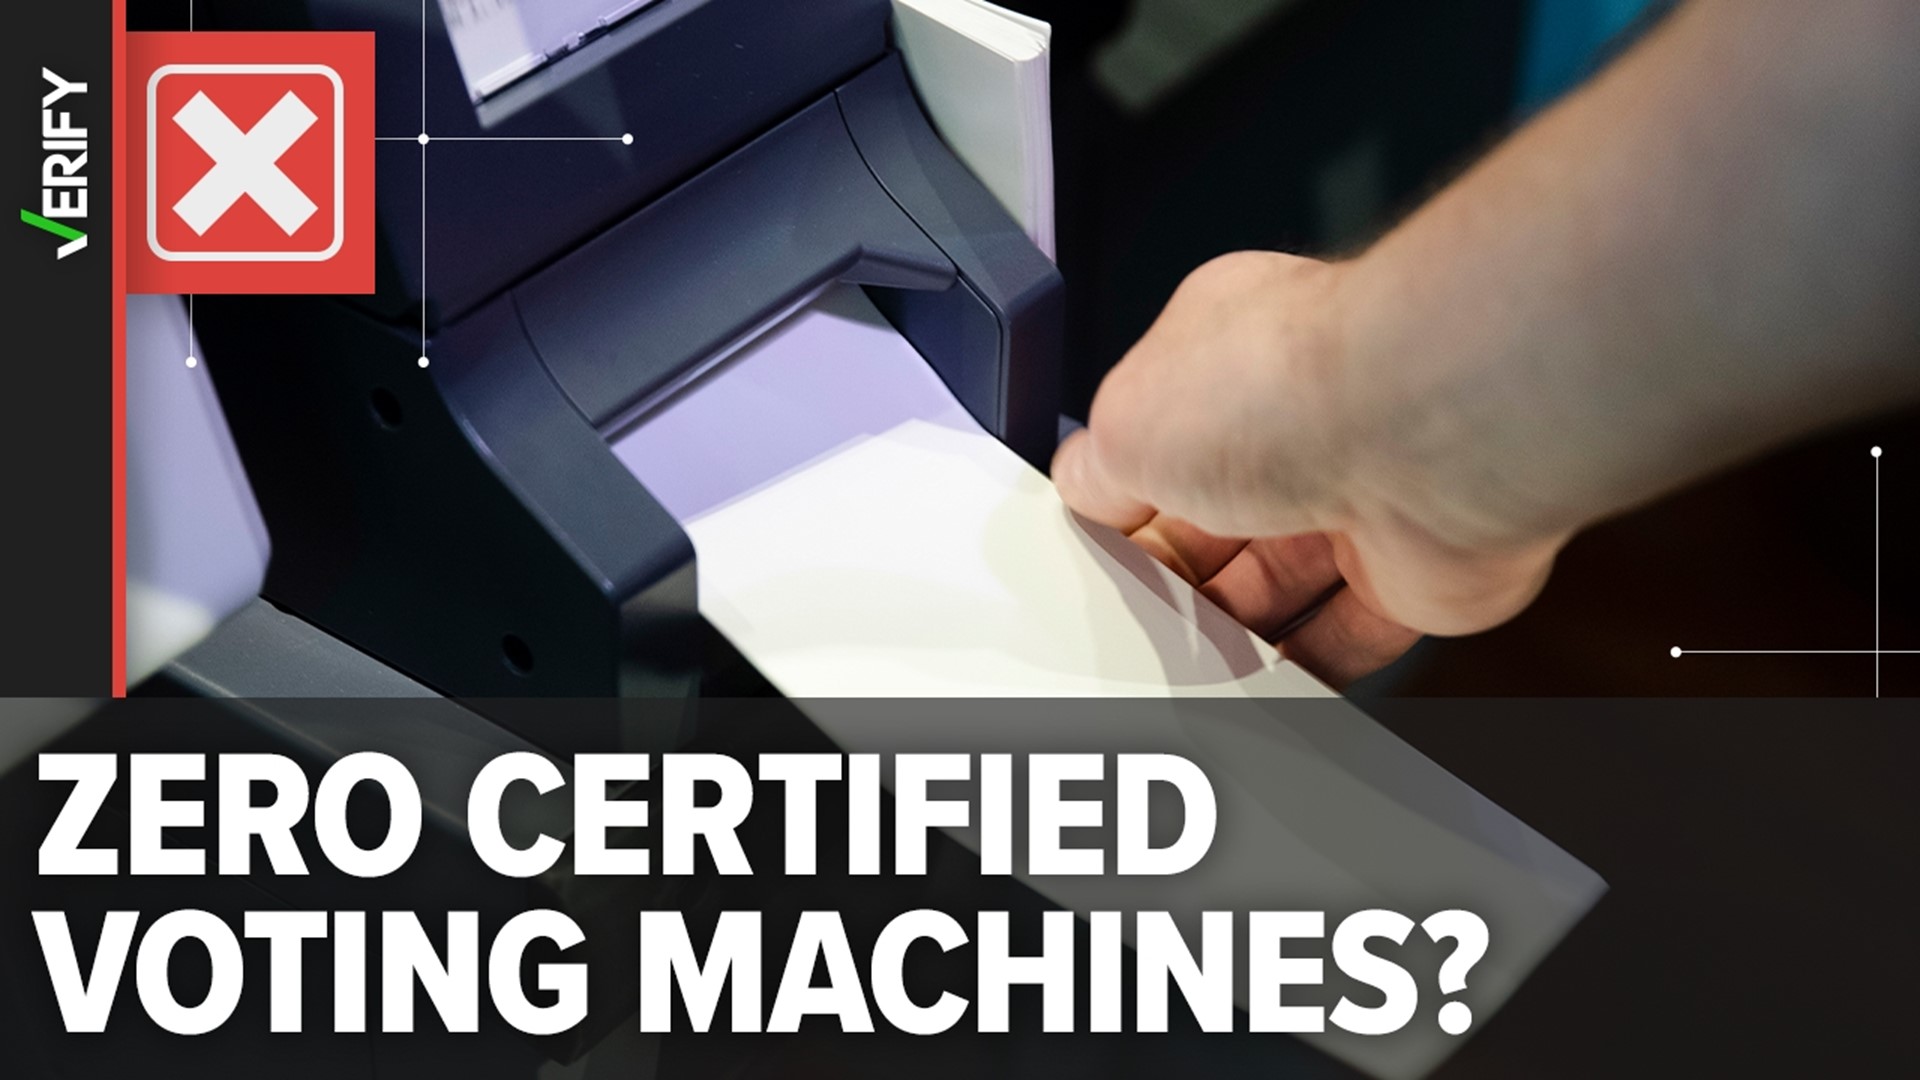 After Trump questioned Biden’s 2020 victory, new certification standards were made for voting machines. But they don’t decertify old systems.